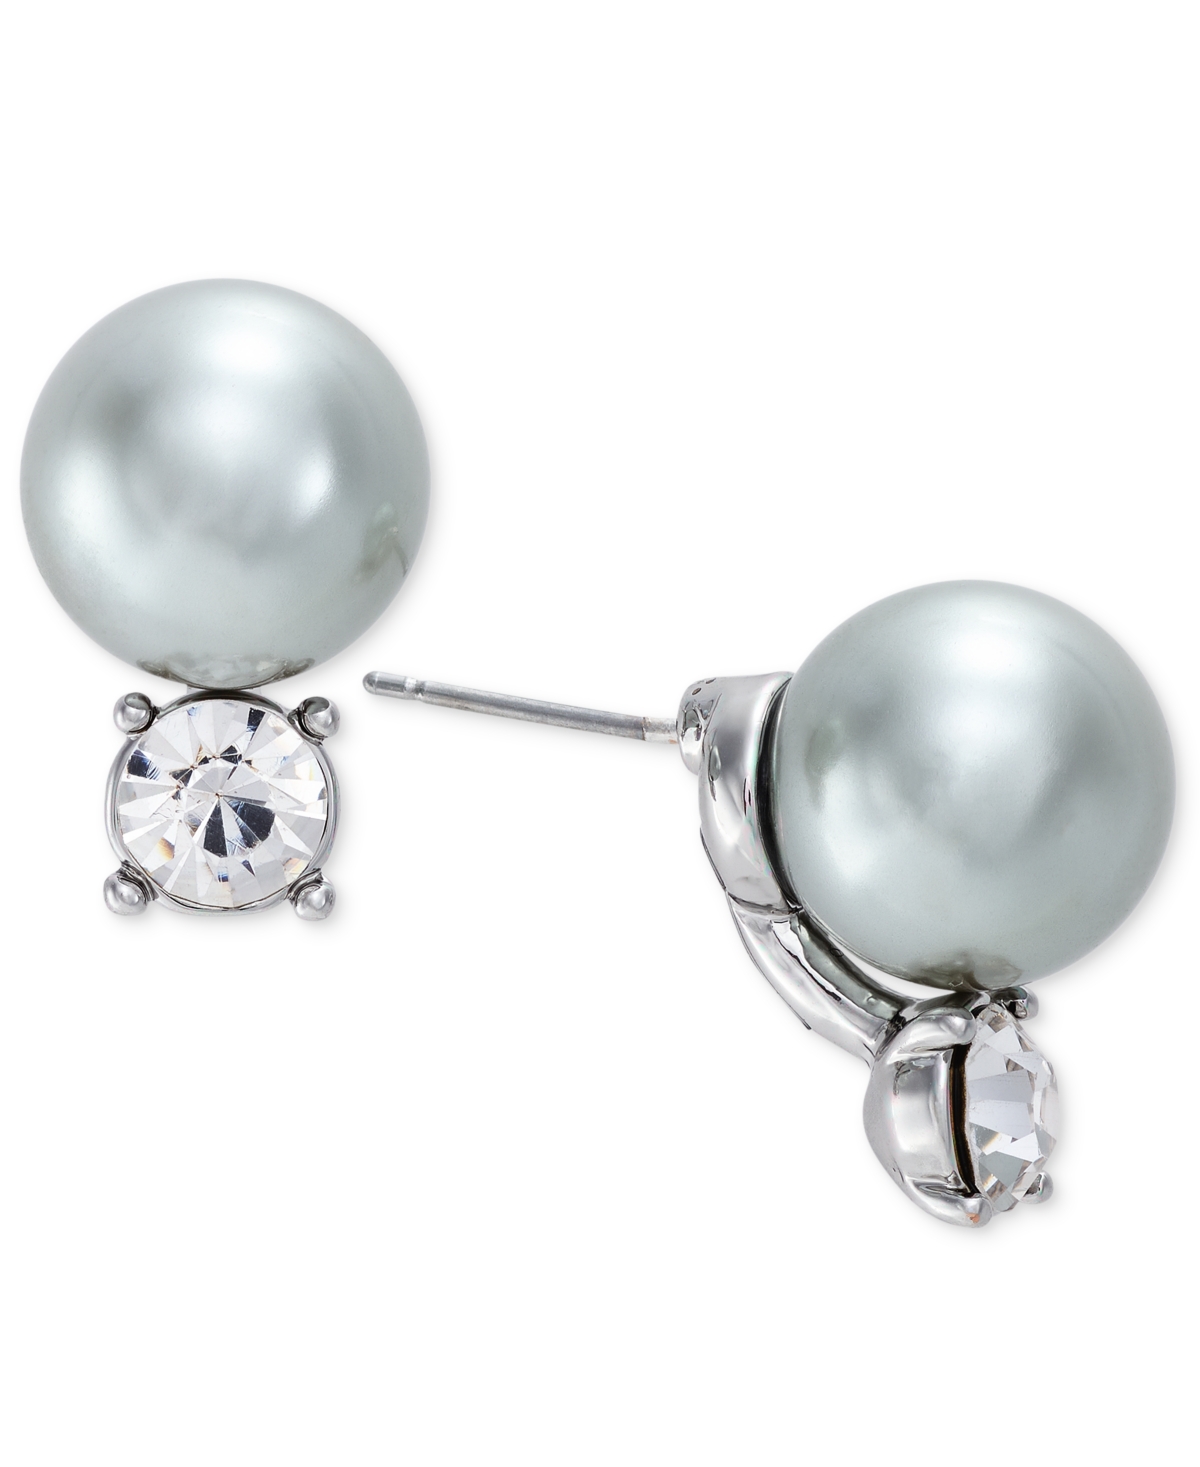 Silver-Tone Crystal & Color Imitation Pearl Stud Earrings, Created for Macy's - Multi